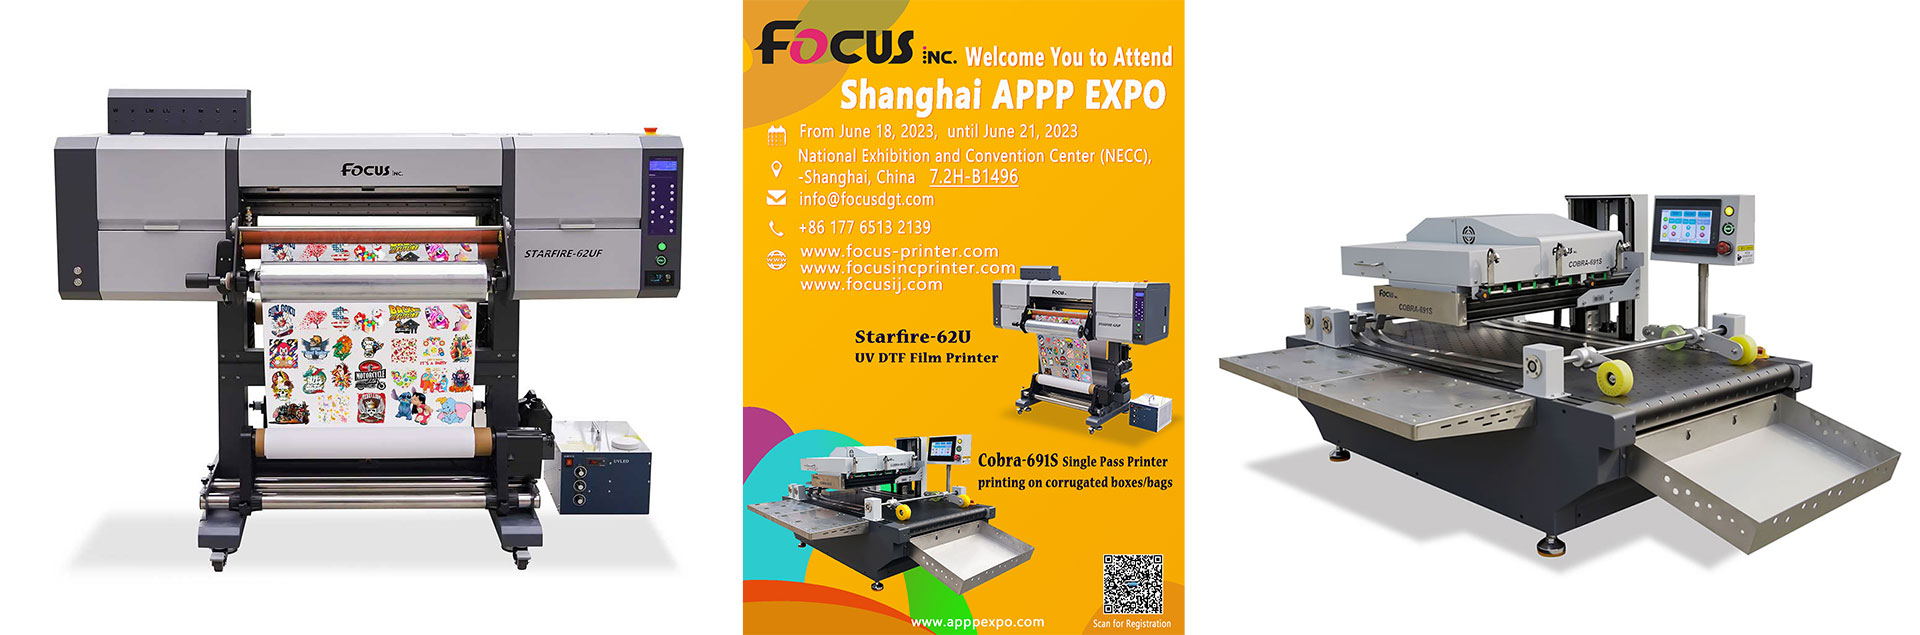 Welcome you to attend shanghai APPP EXPO